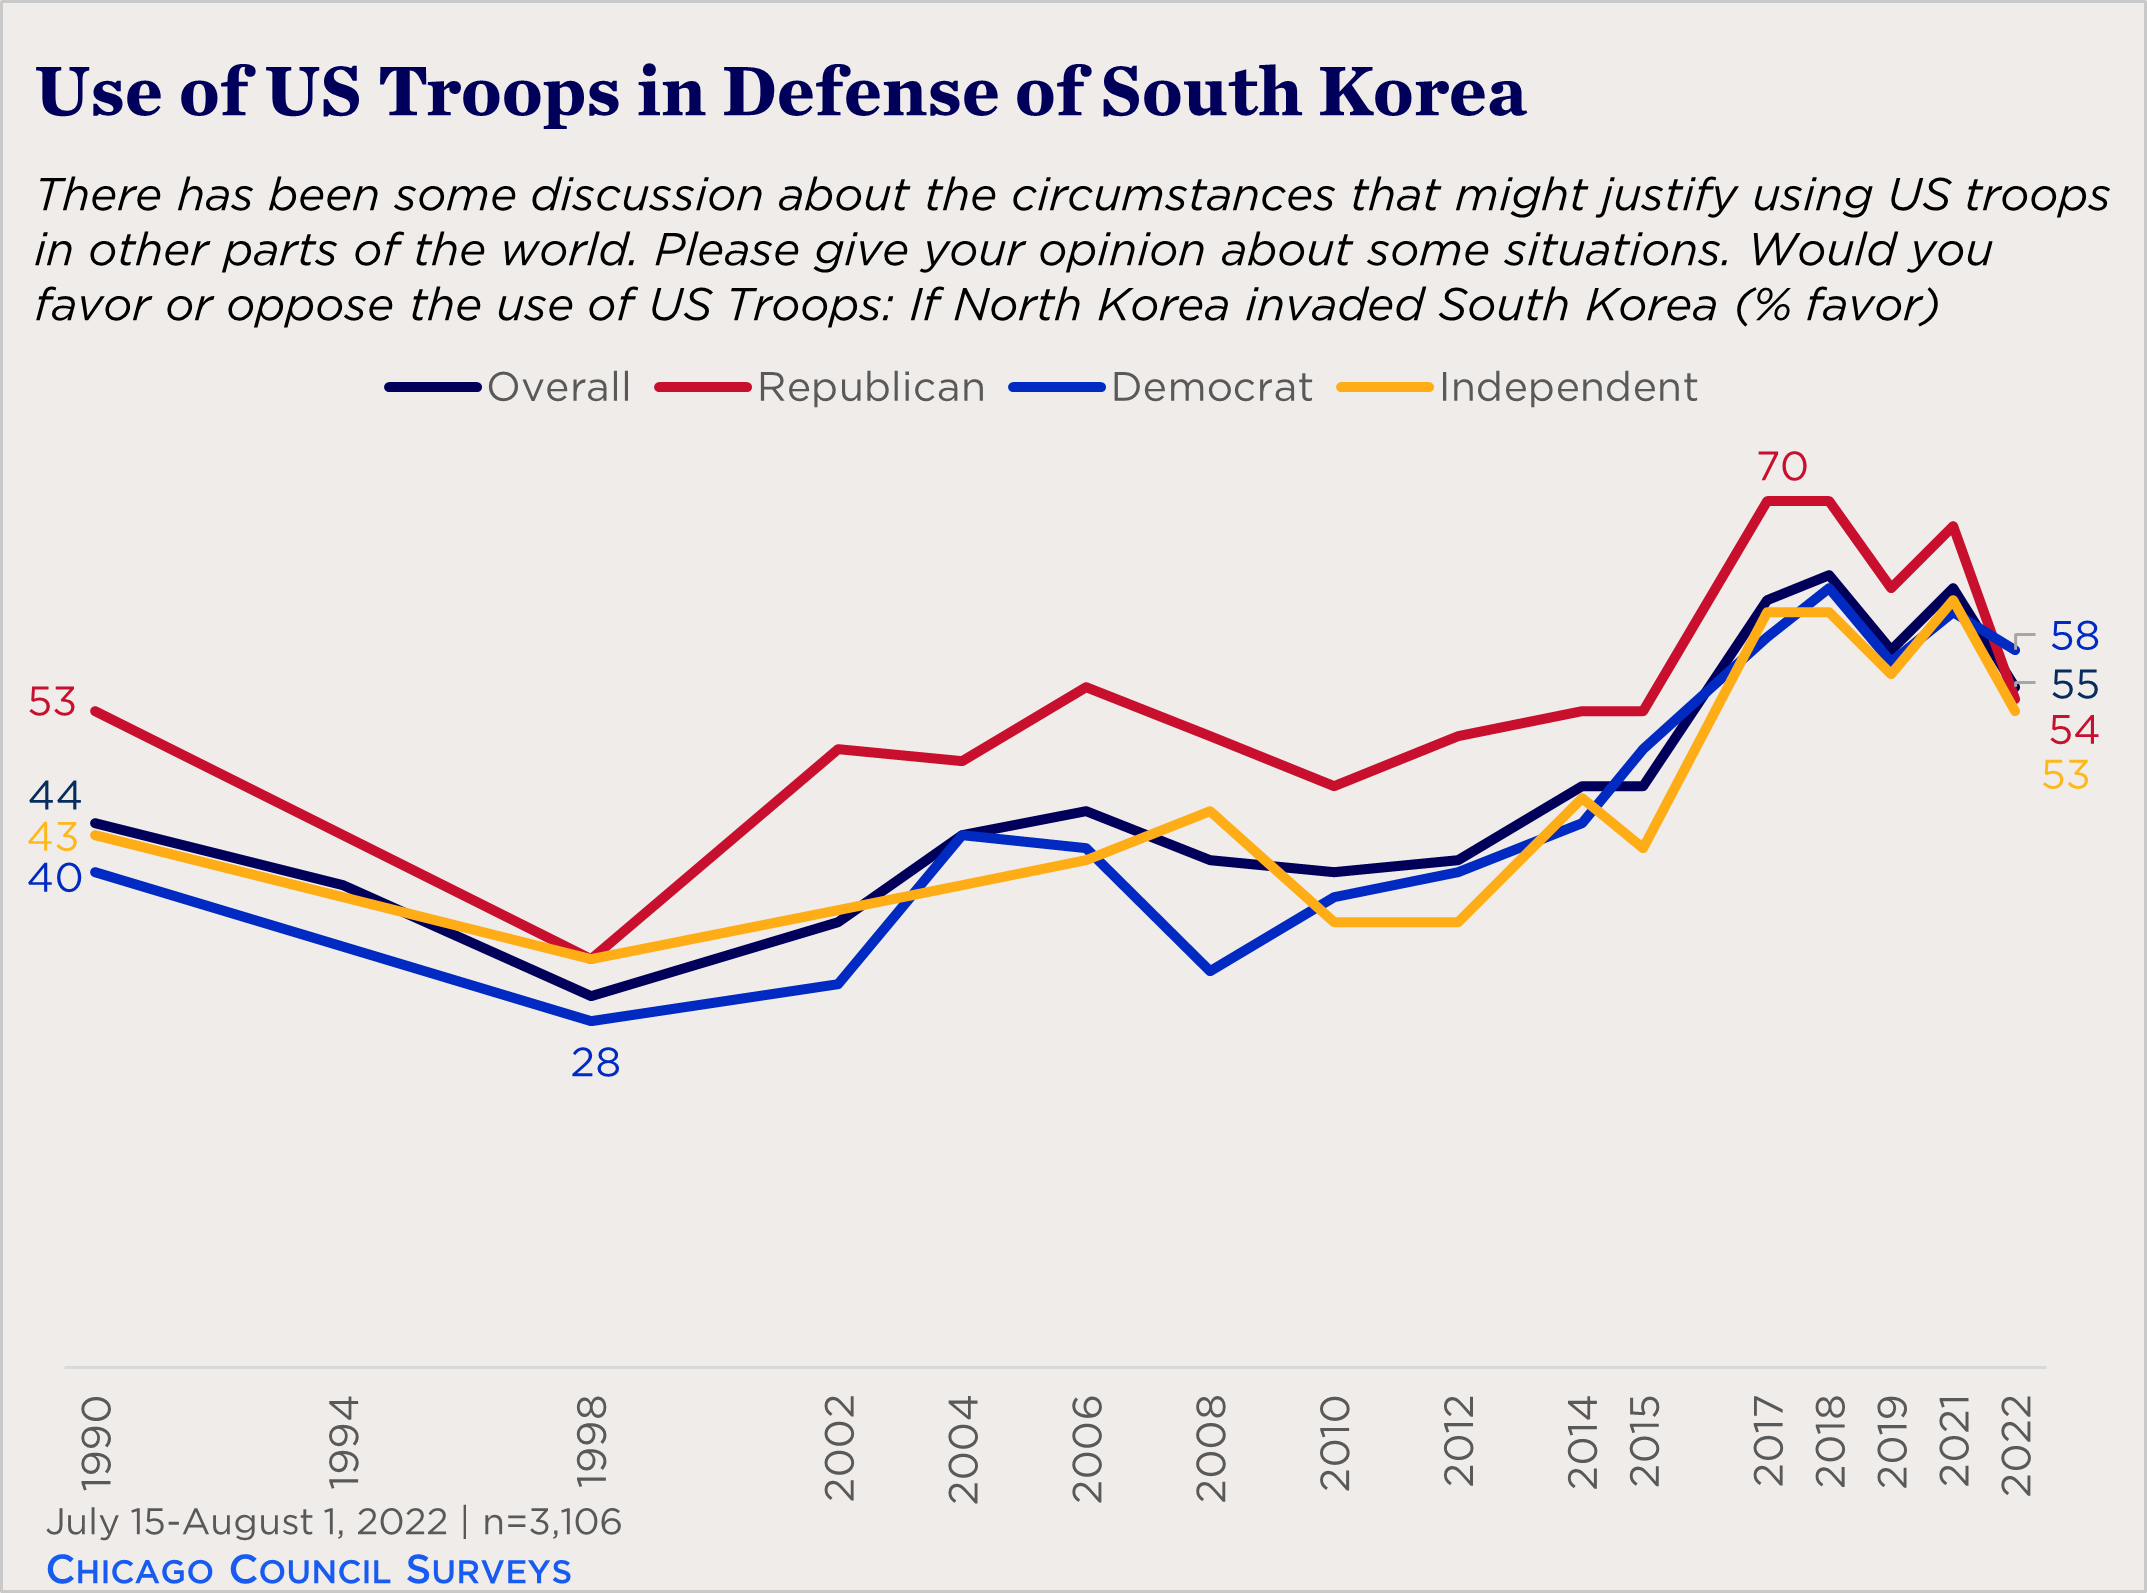 "line chart showing partisan view of using US troops to defend South Korea"